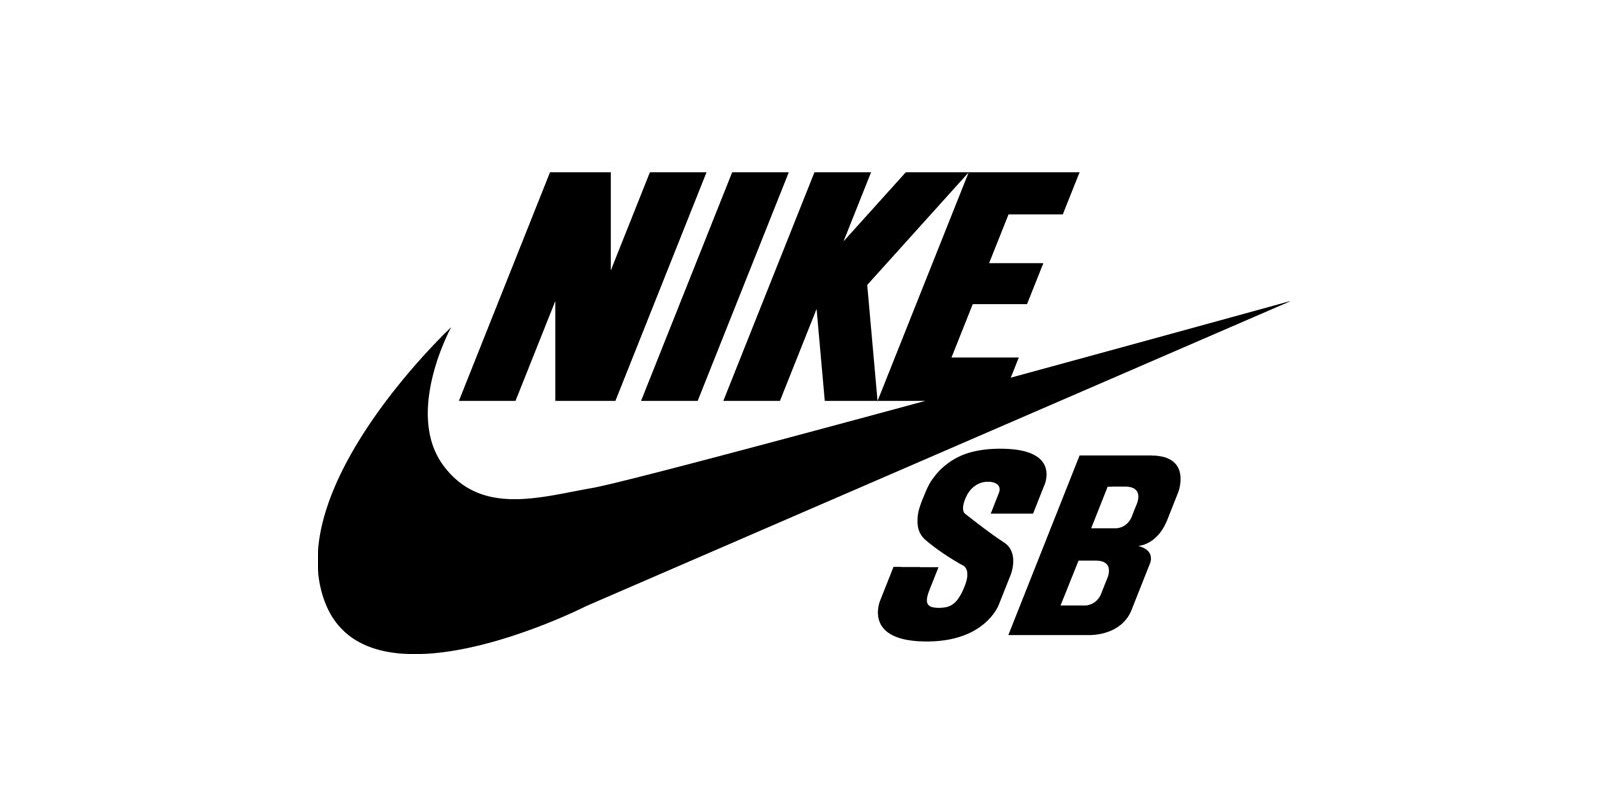 Nike's Iconic Swoosh Symbol Stuns Consumers Through Simplicity & A Deeper  Meaning